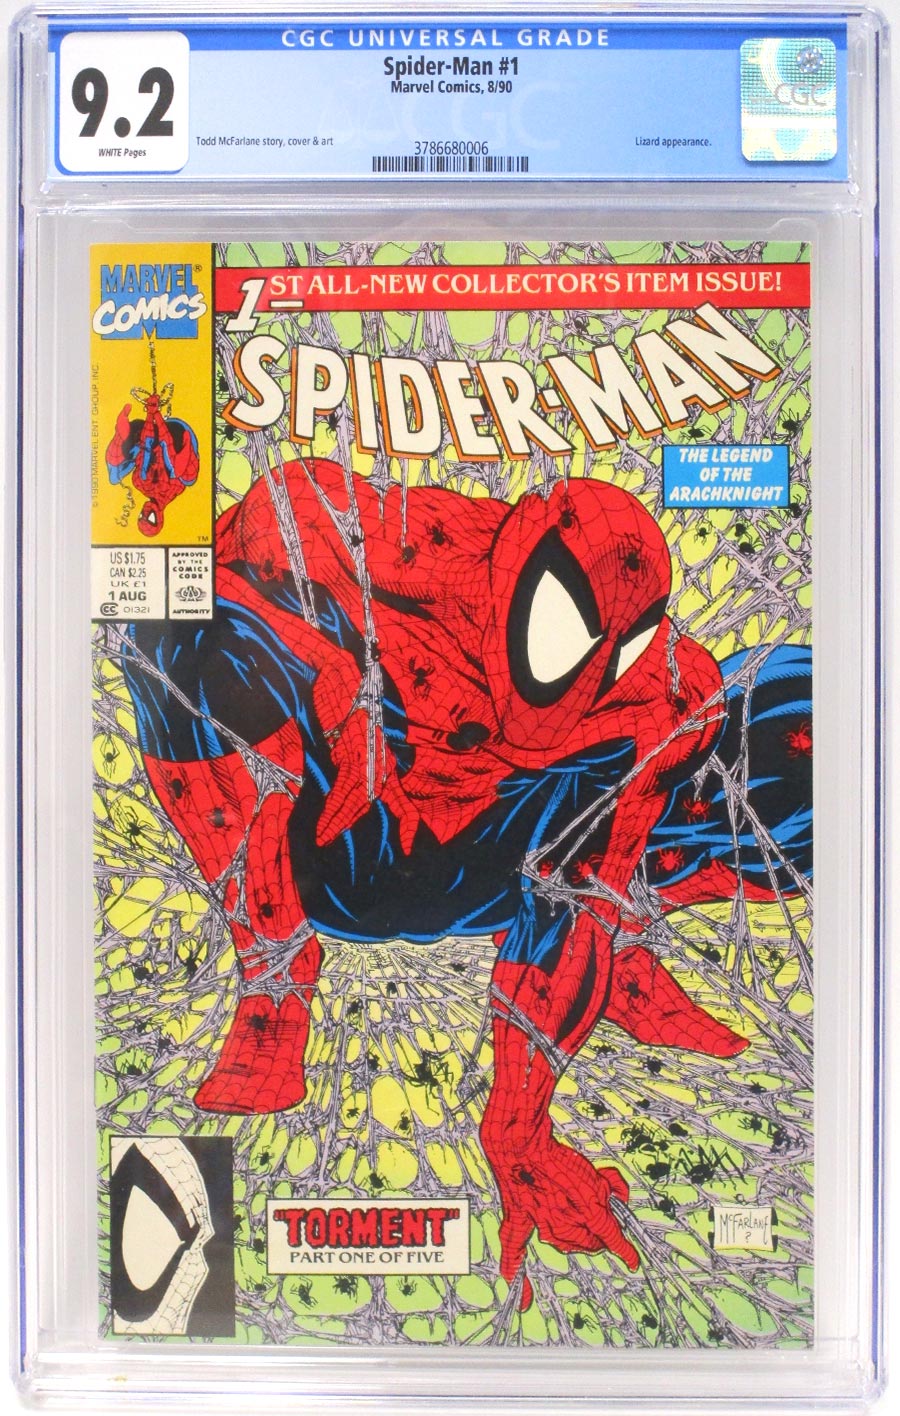 Spider-Man #1 Cover O 1st Ptg Regular Edition With Spidey Face In UPC Box No Bag CGC 9.2